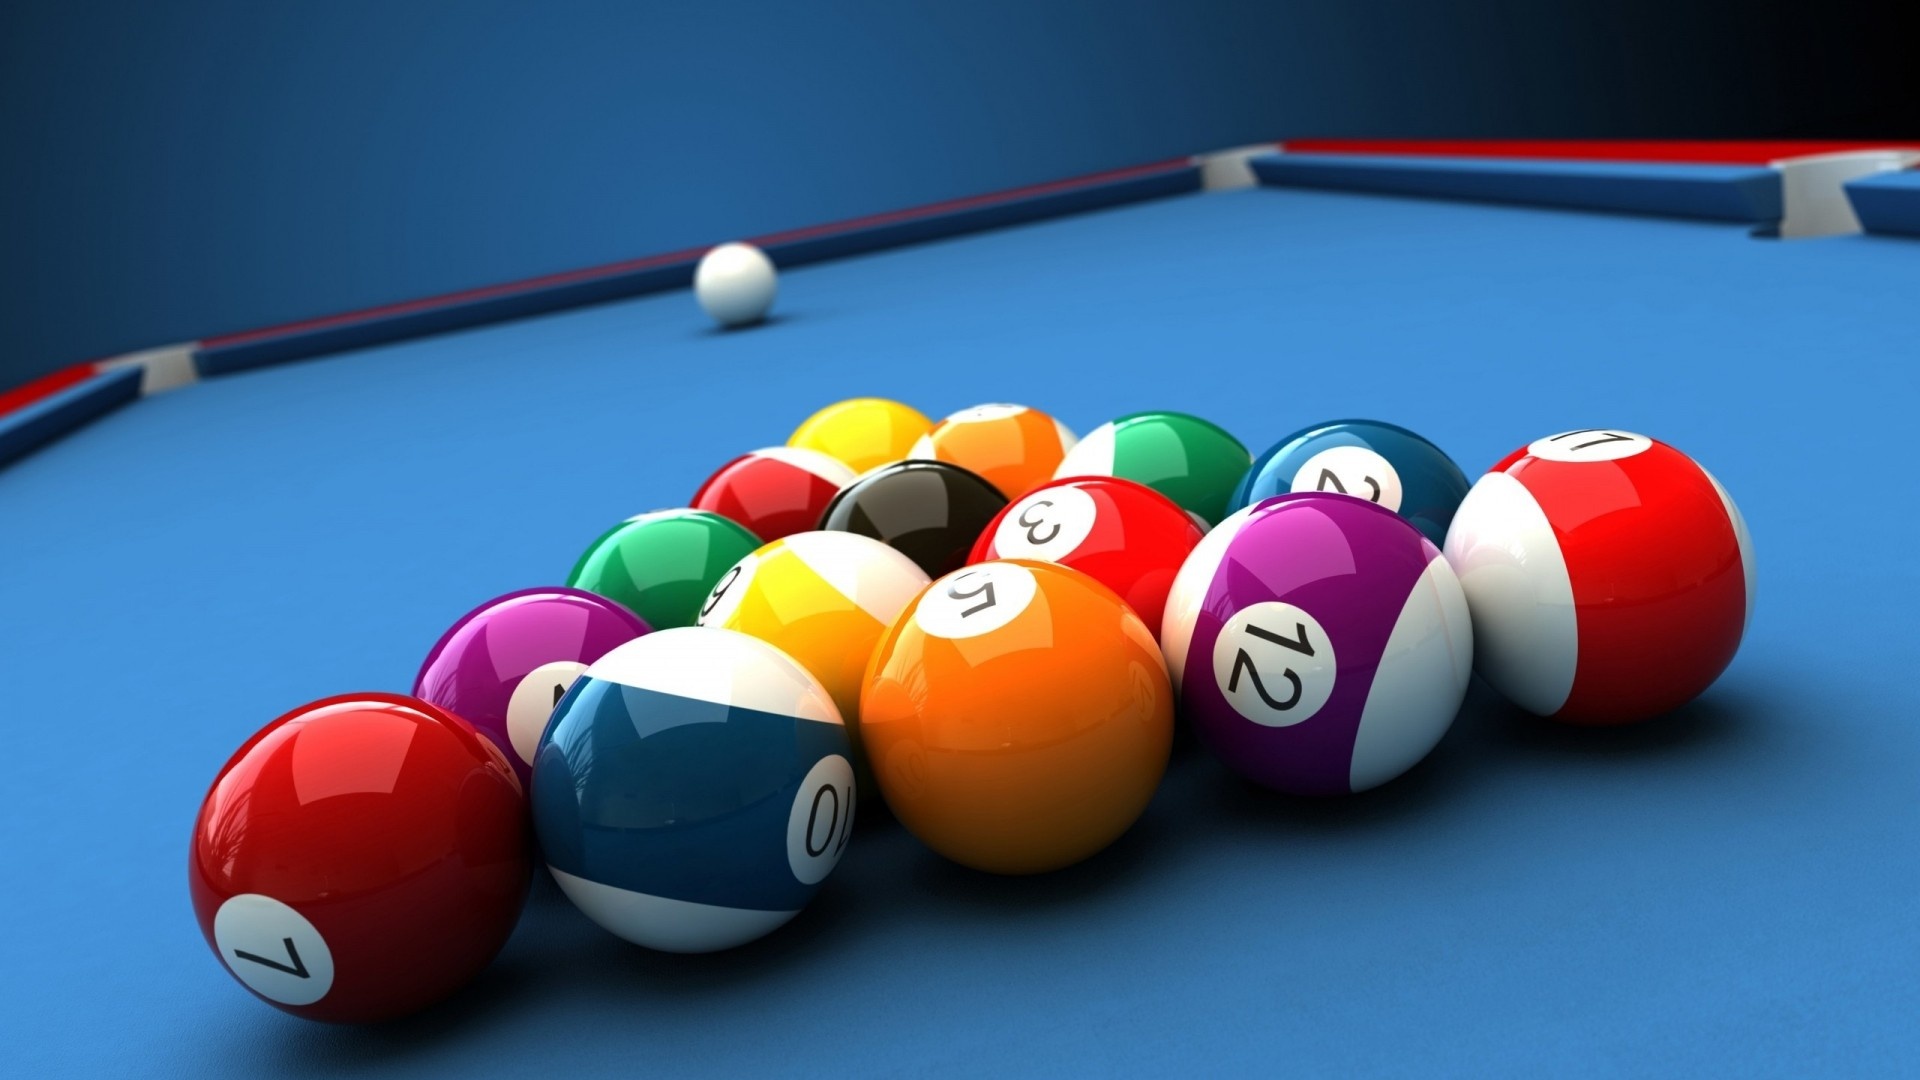 Cue Sports: A classic eight-ball style of a game with a cue stick, Last preparations before a break shot. 1920x1080 Full HD Wallpaper.